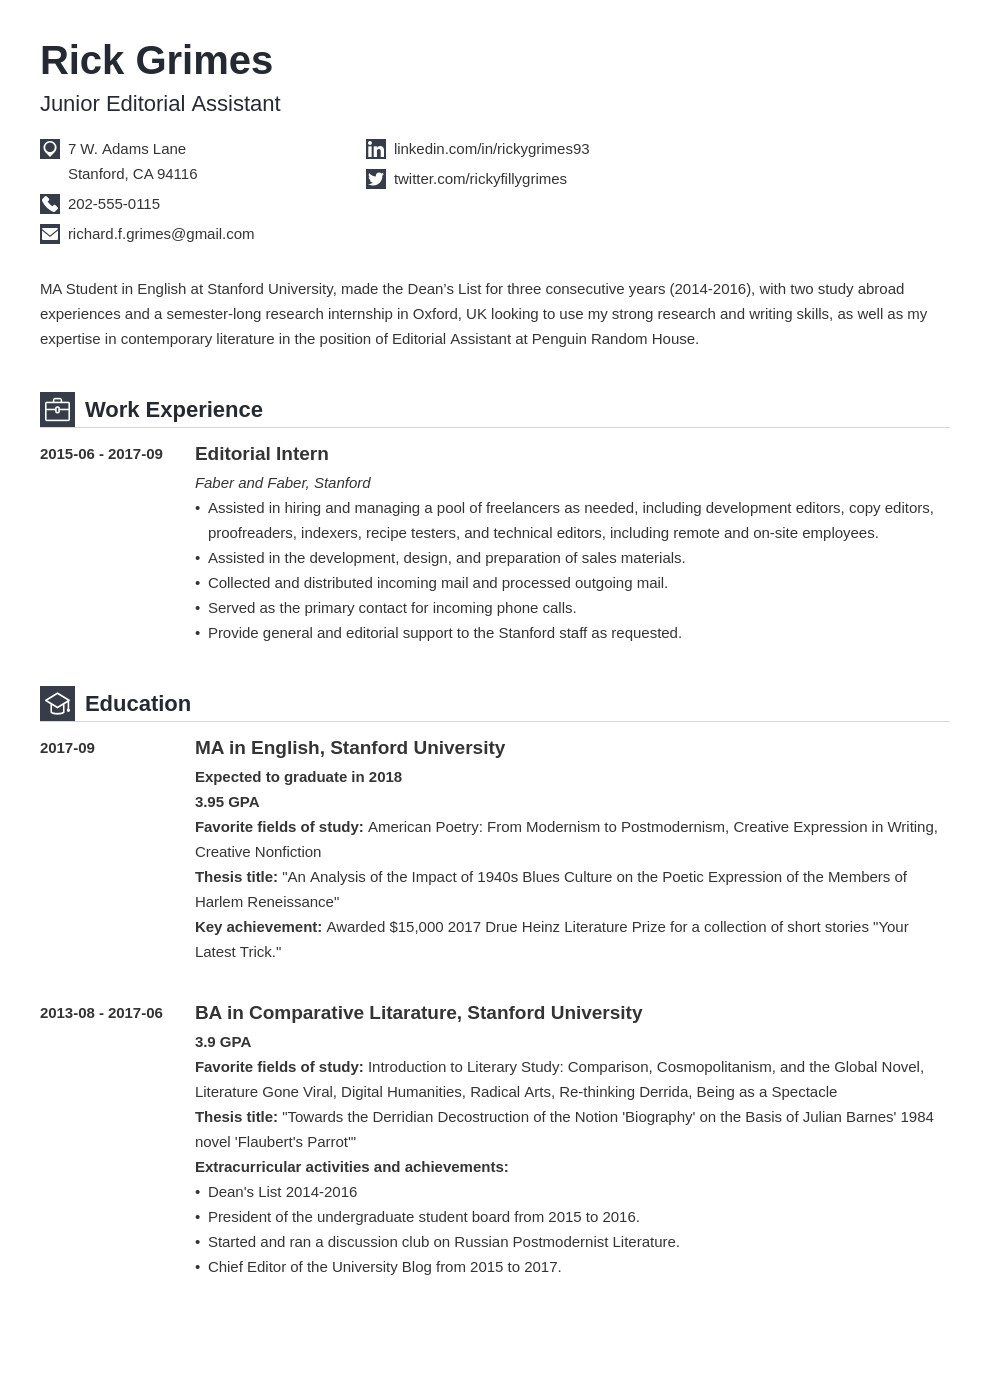 Sample Resume for College Student for Internship Internship Resume Sample for College Students – Good Resume Examples